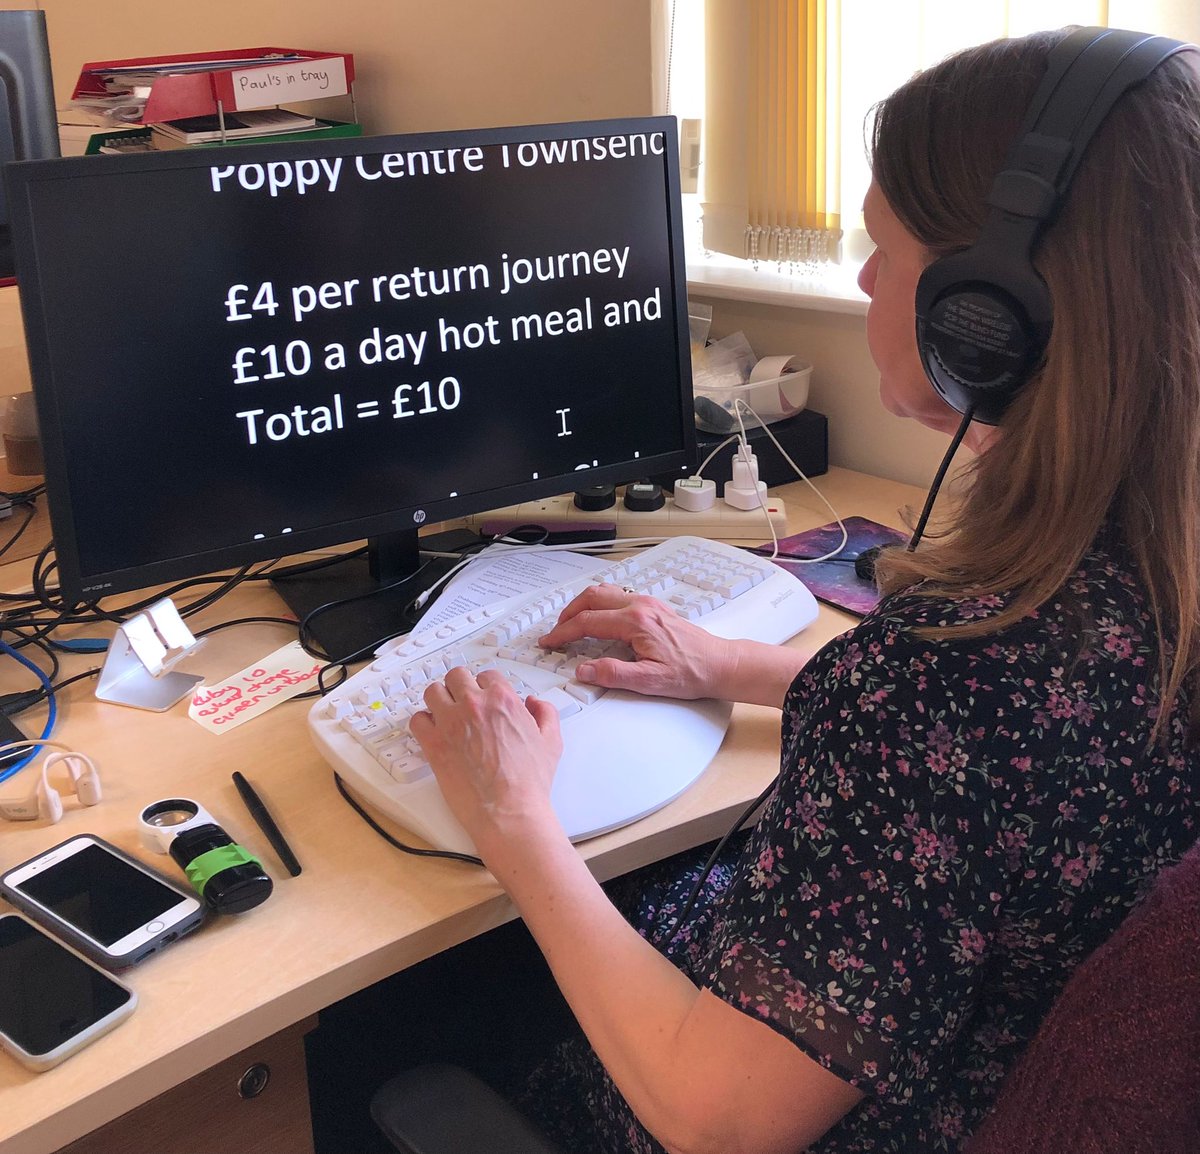 A screen reader is a software programme on a phone or computer, providing auditory feedback of screen content to blind and partially sighted users through audio cues, vibrations, and sound alerts.